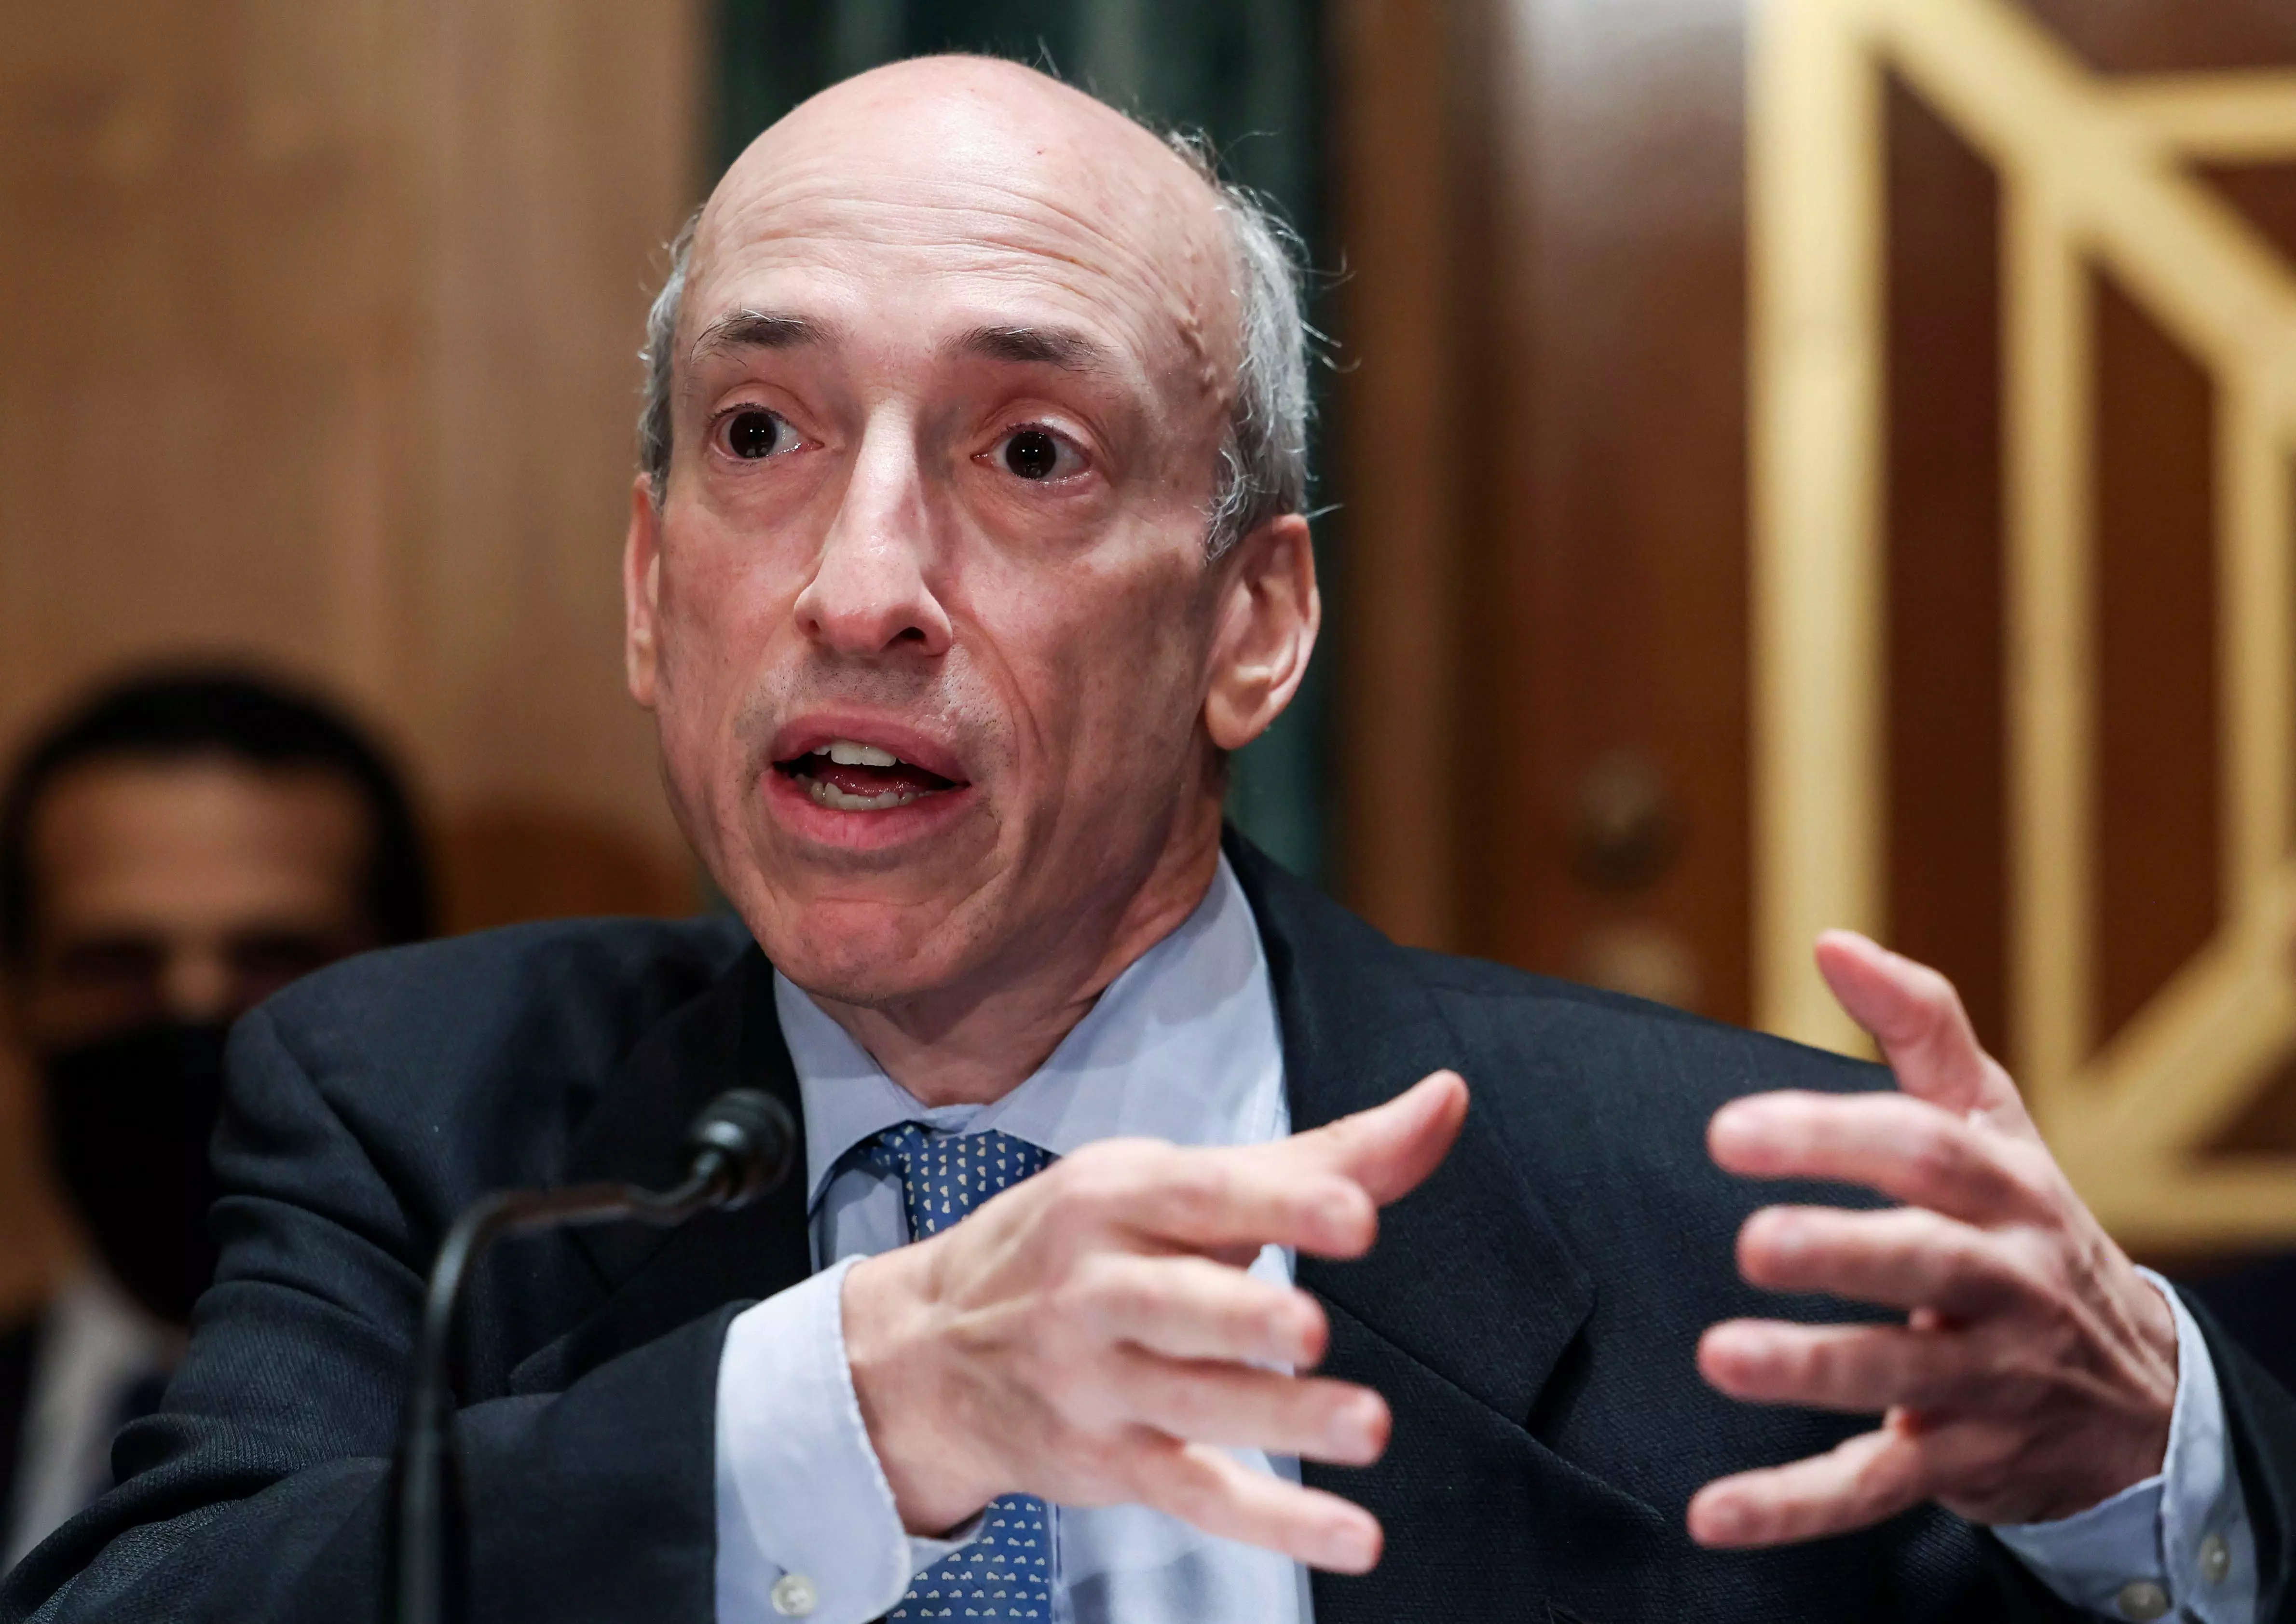 Securities and Exchange Commission, Chairman Gary Gensler speaks and gestures with his hands, during a Senate Banking, Housing, and Urban Affairs Committee hearing on "Oversight of the U.S. Securities and Exchange Commission" on Tuesday, Sept. 14, 2021, in Washington.